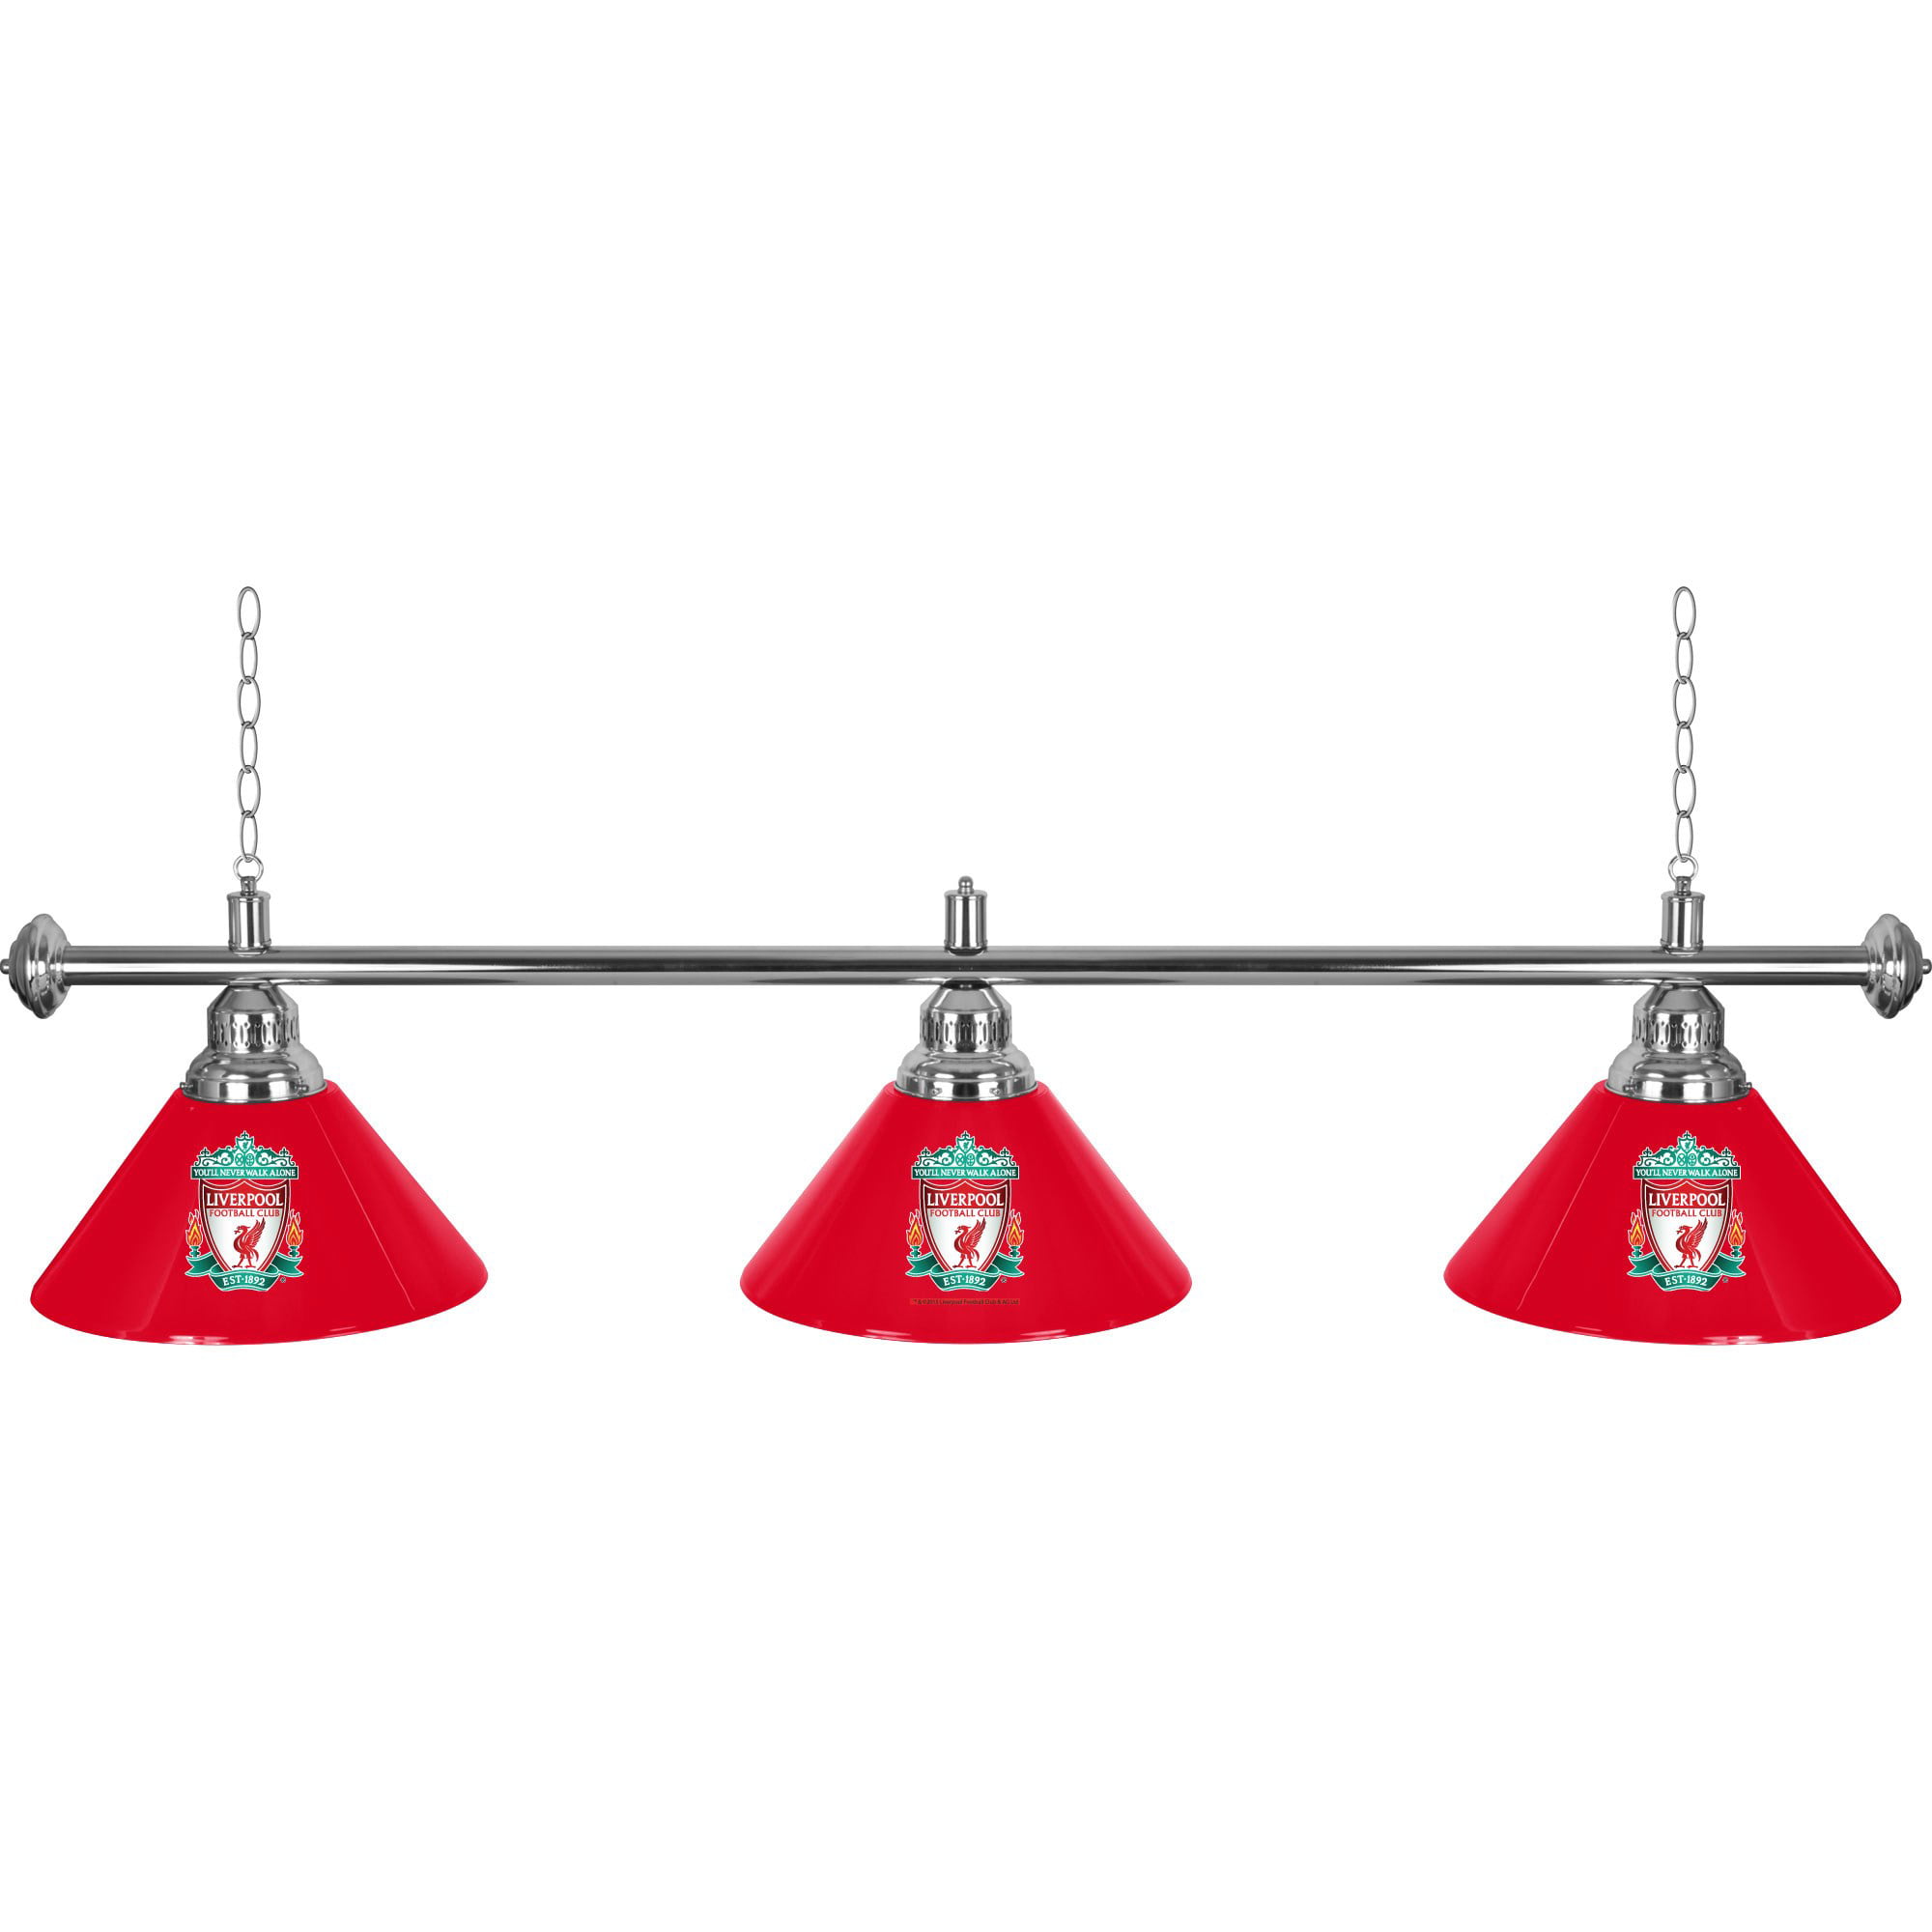 Liverpool F.C.Ceiling Light Shade Official Merchandise 